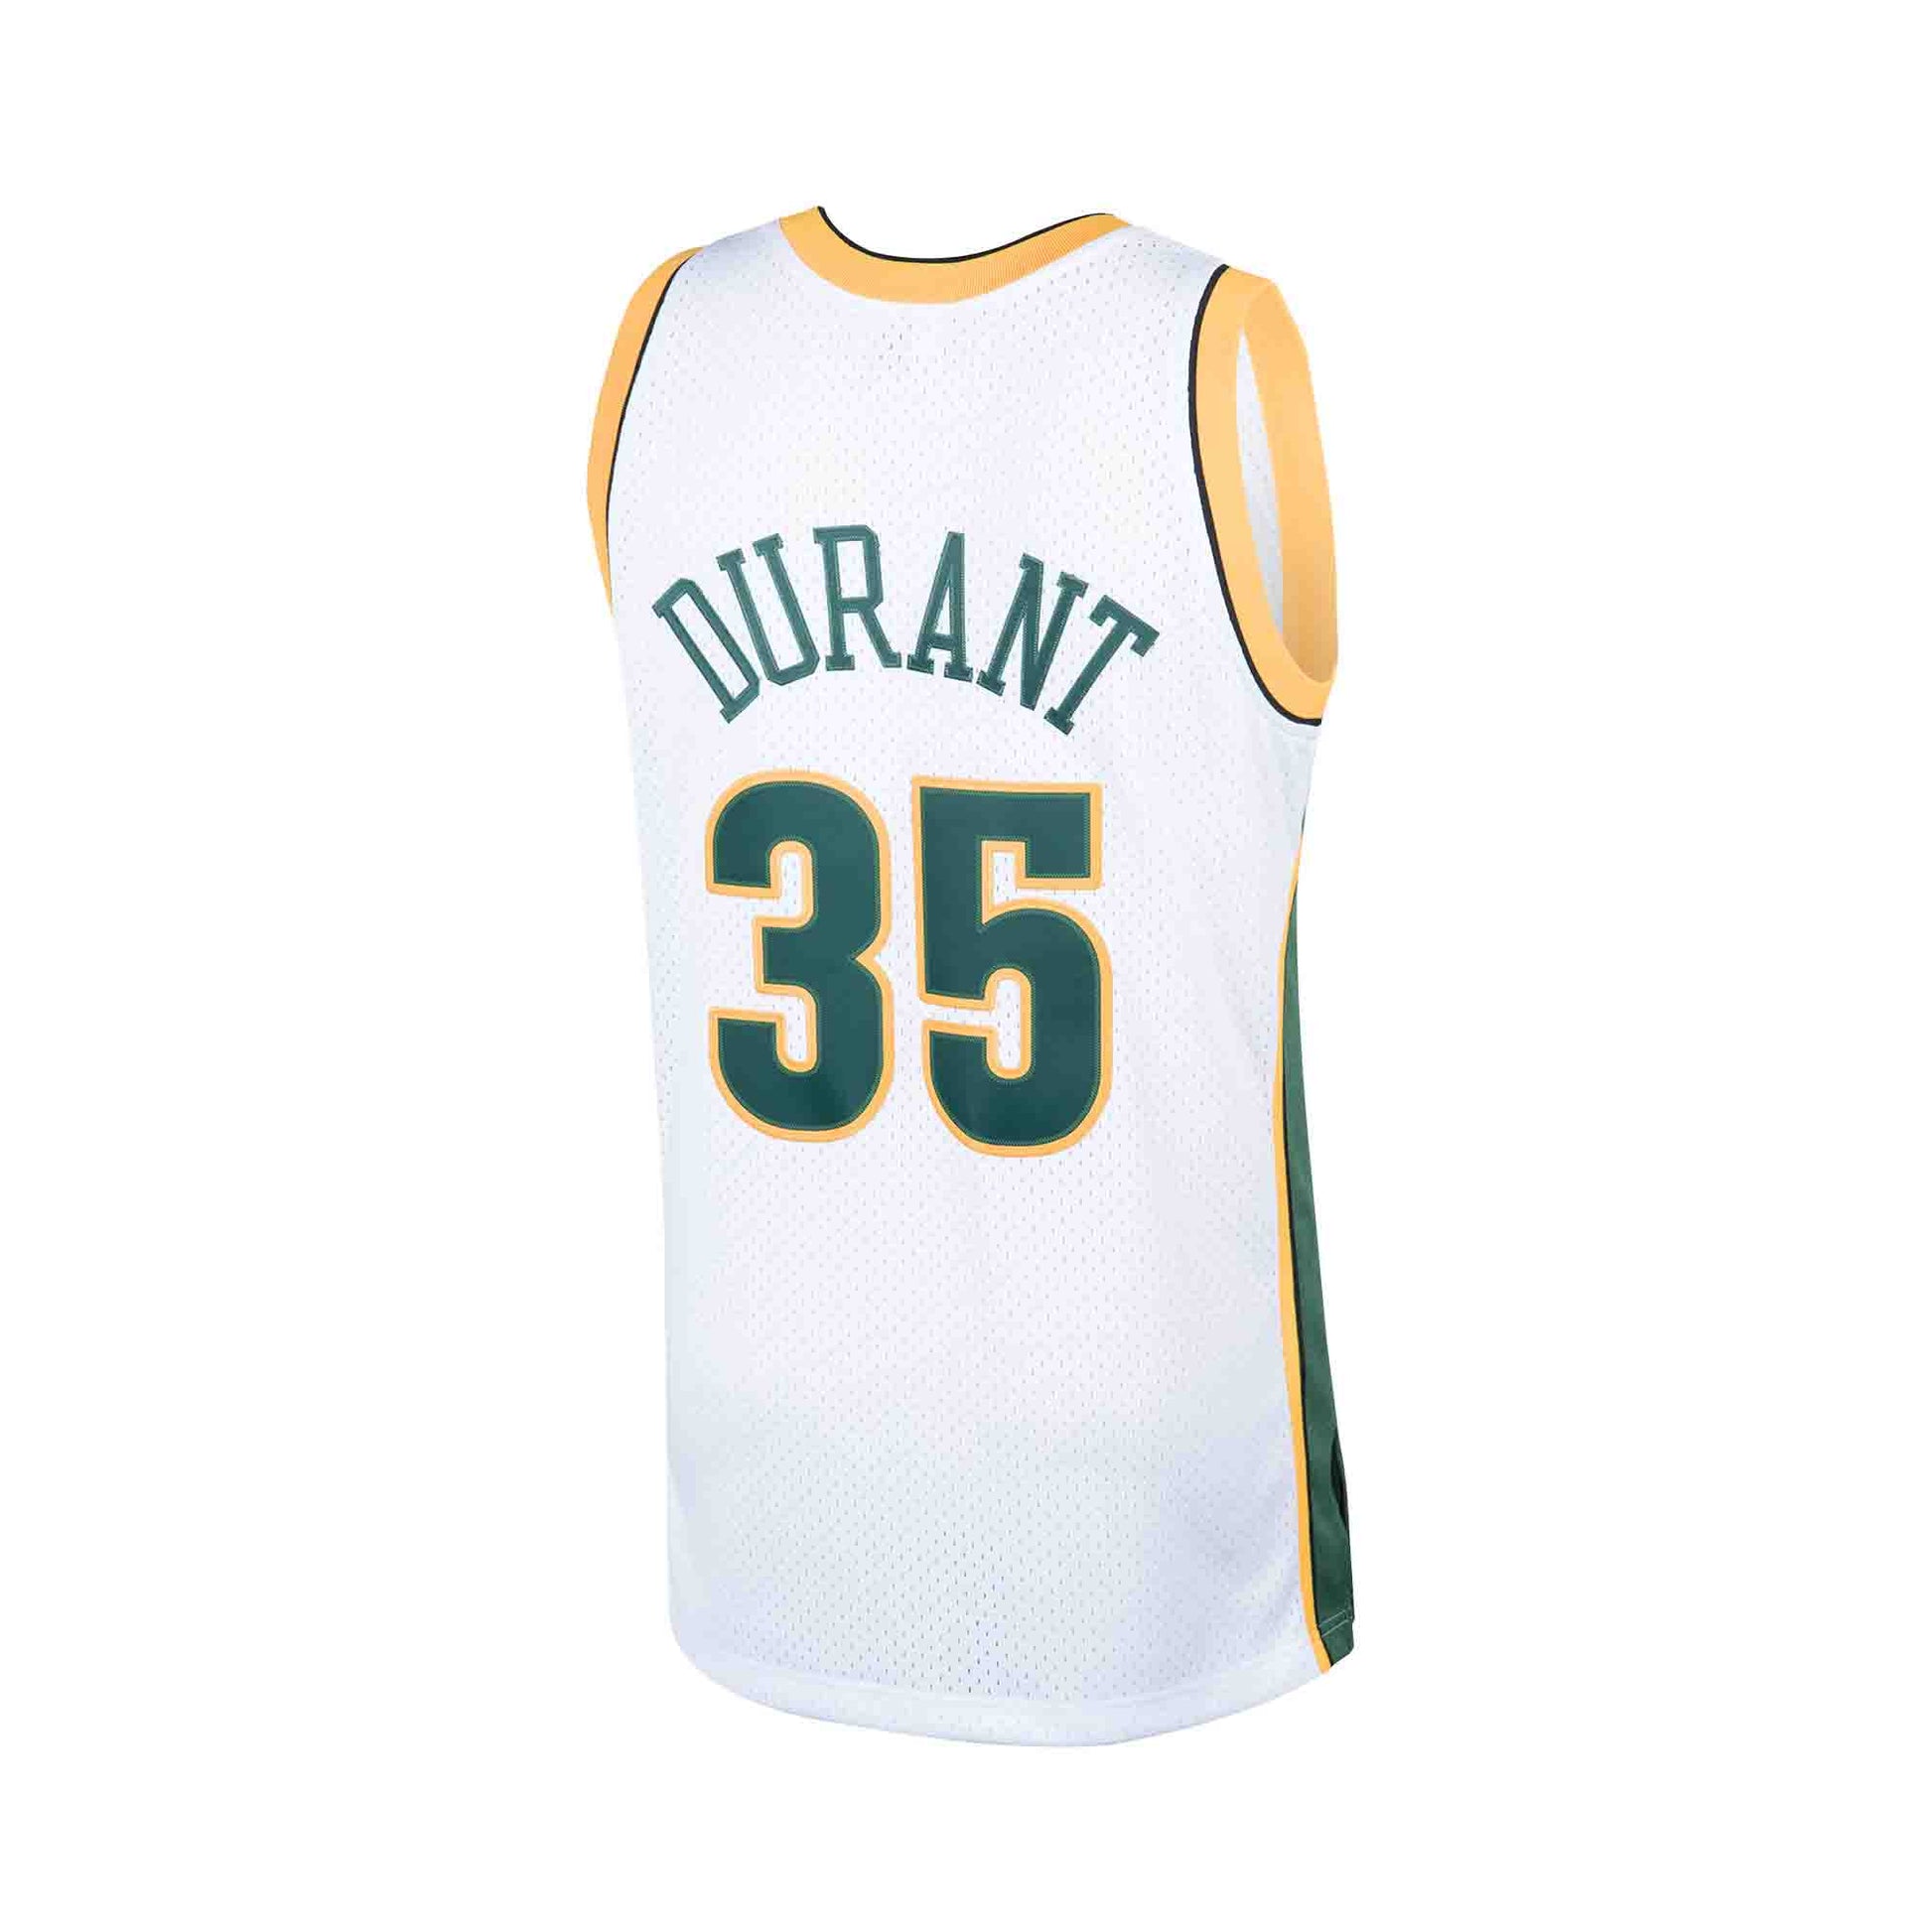 MITCHELL & NESS NBA HARDWOOD CLASSIC SWINGMAN SEATTLE SUPERSONICS KEVIN DURANT HOME 2007-08 JERSEY White XL / New